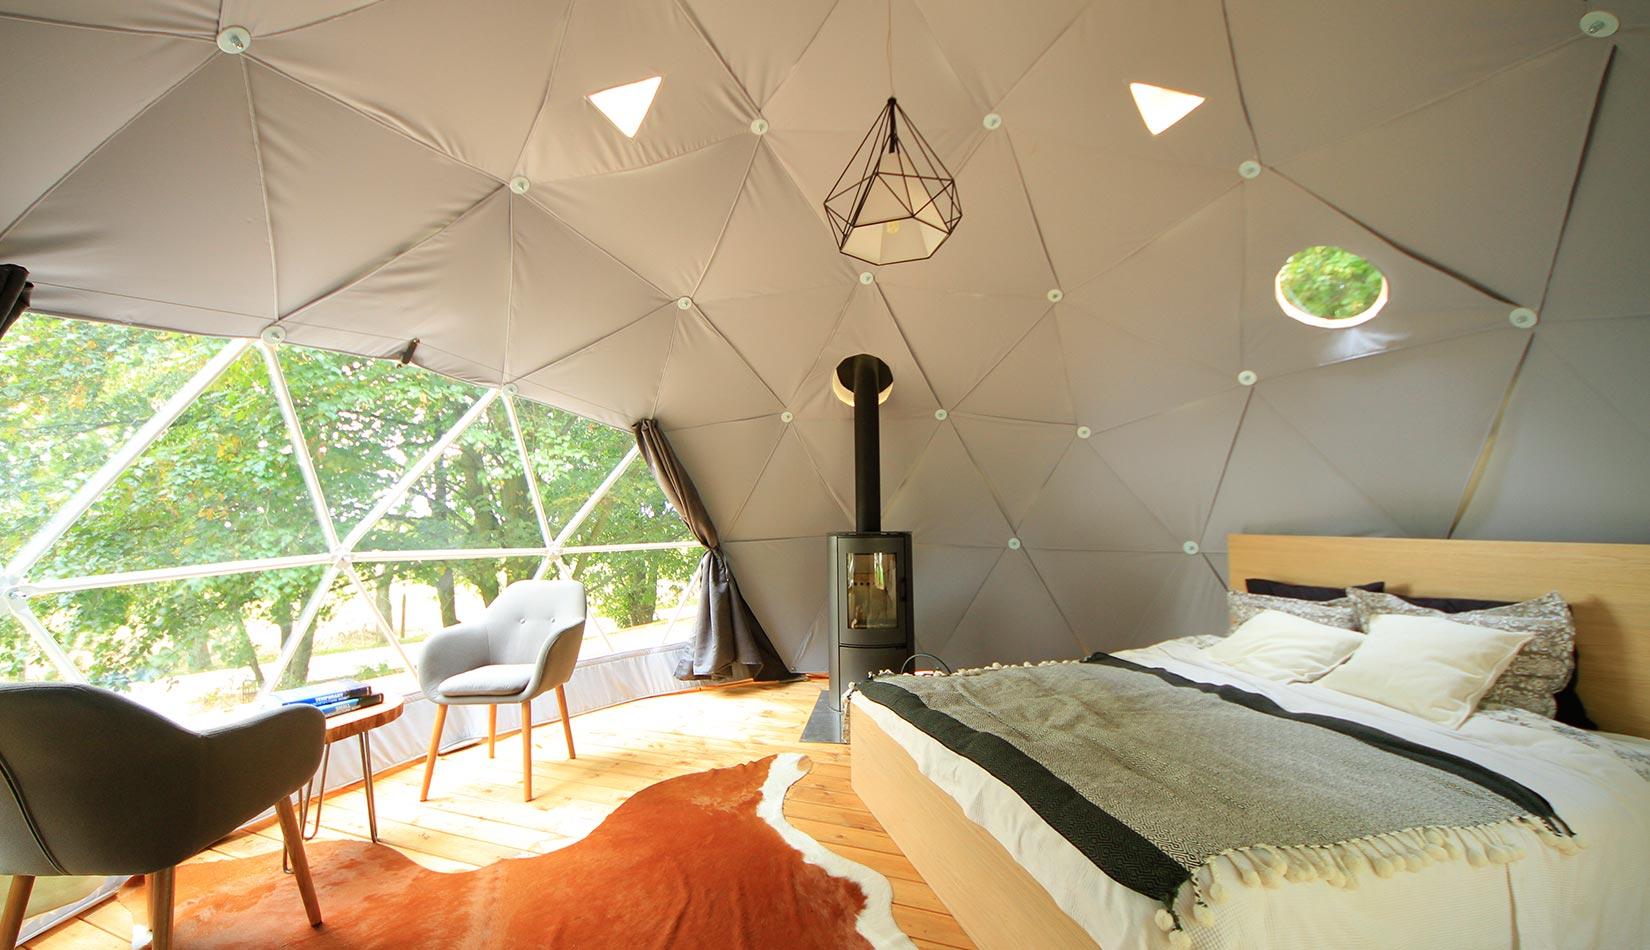 interior of geodesic dome with view at window, chairs, table coffee and fireplace